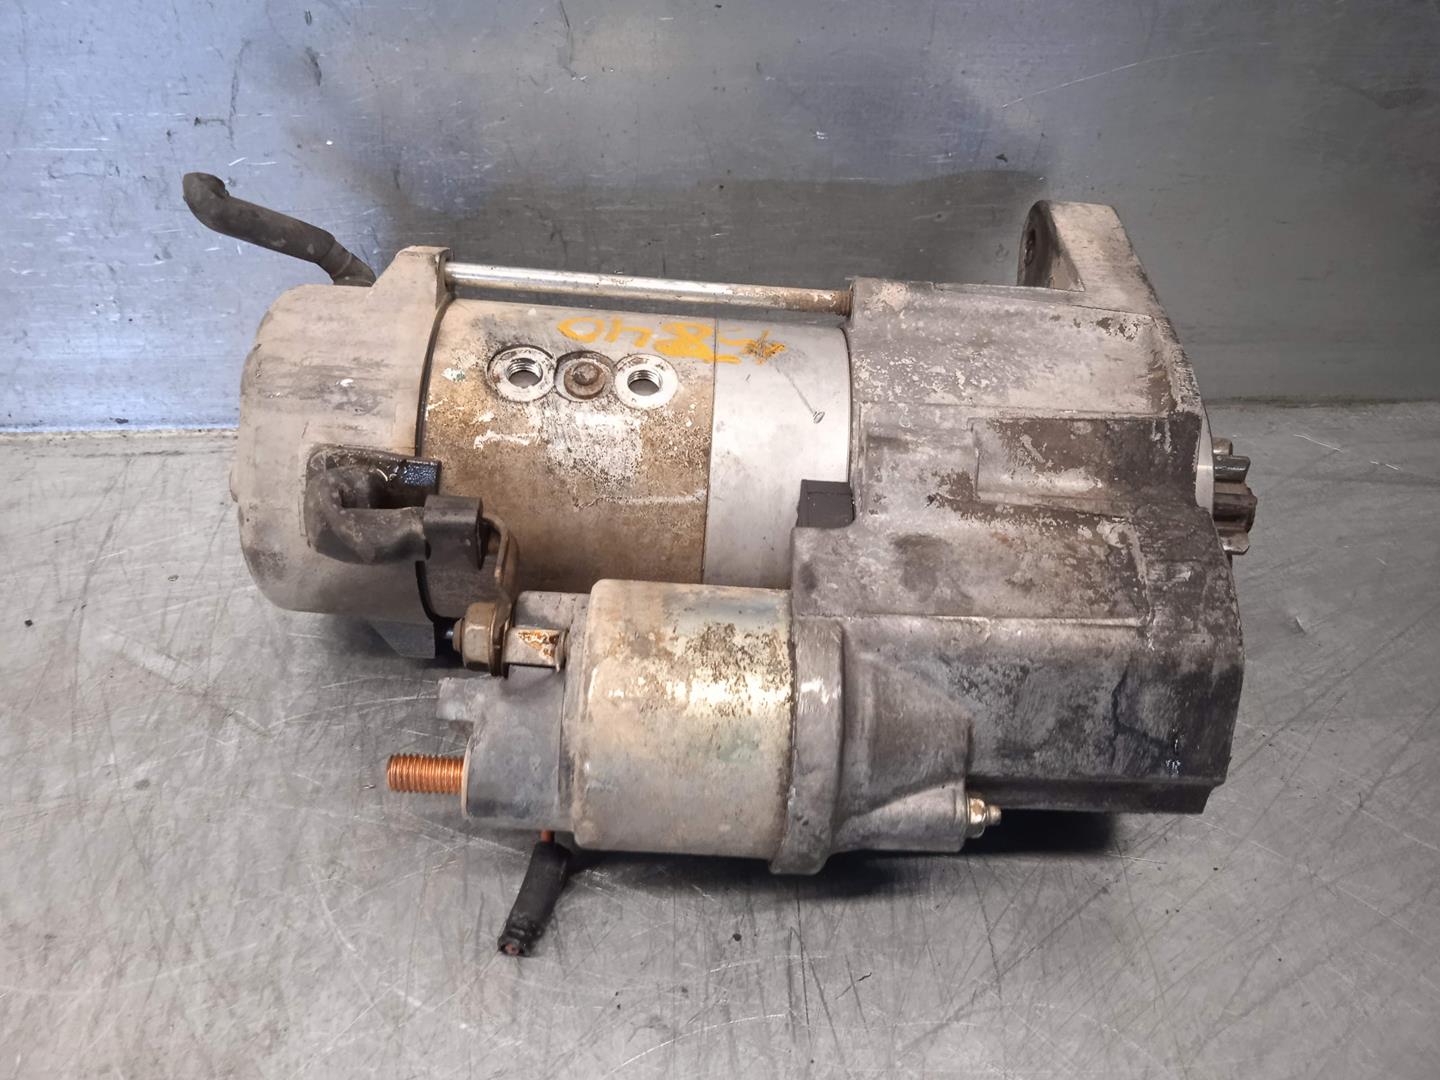 LAND ROVER Discovery 4 generation (2009-2016) Starter Motor NAD500080, MS4280001941, DENSO 19884792